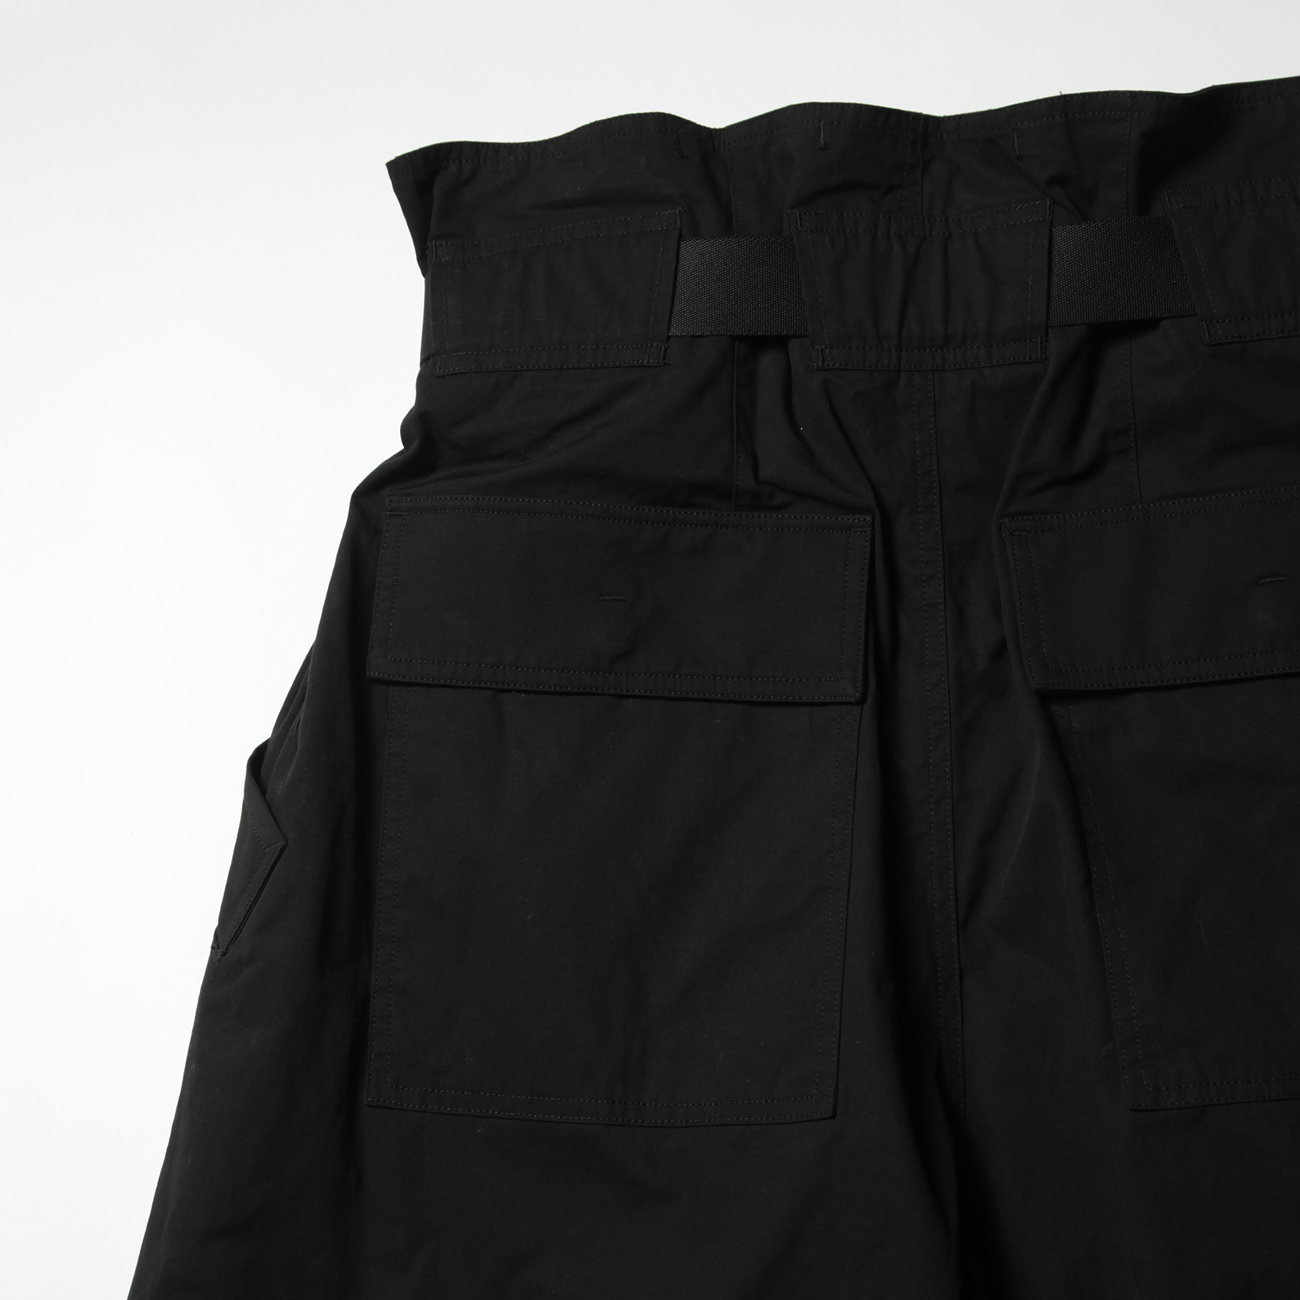 P-4 MILITARY OVER PANTS - Black